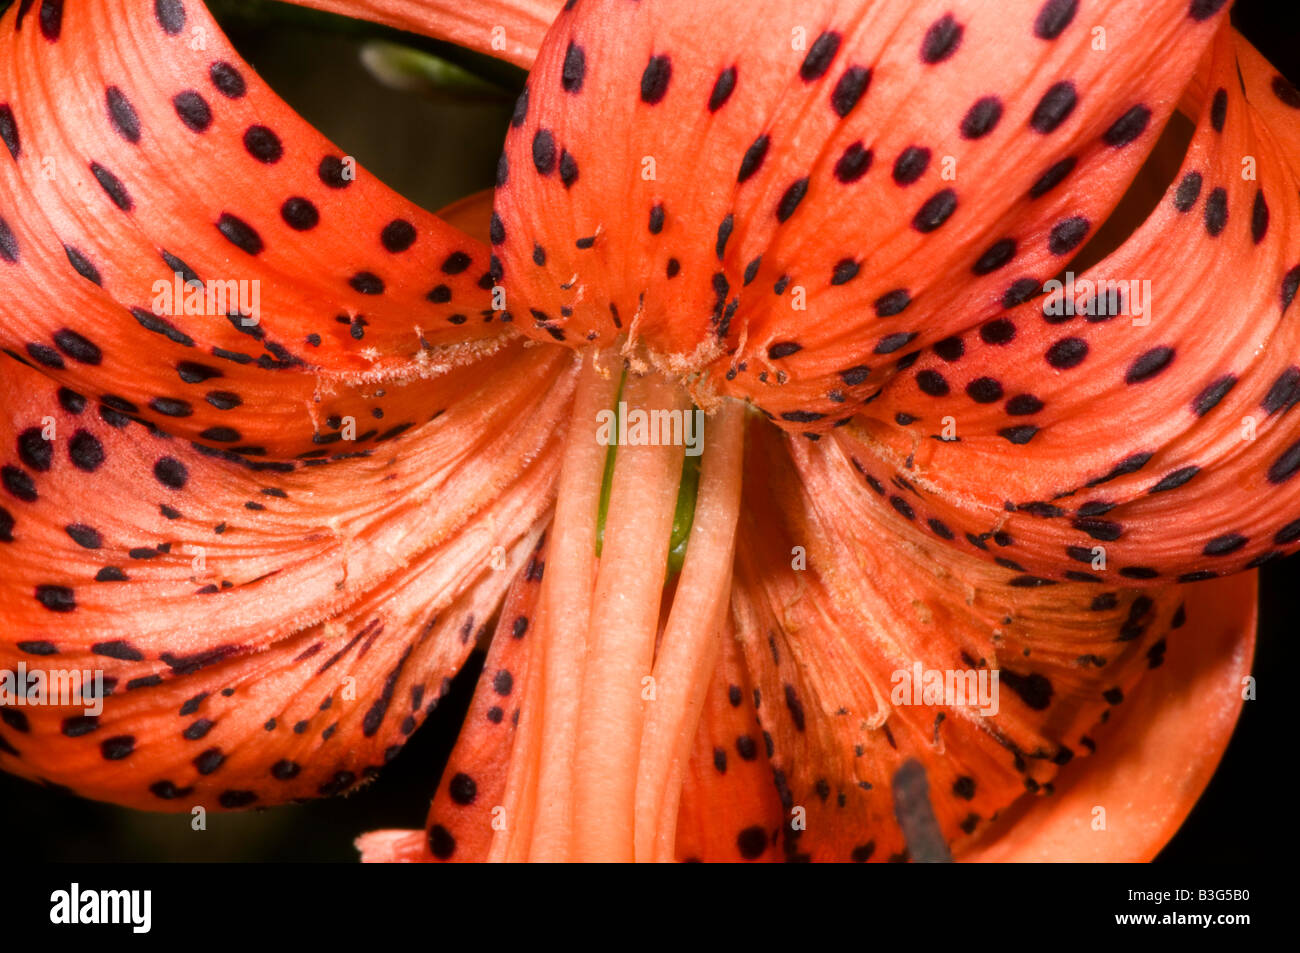 Tiger lily flower closeup Stock Photo